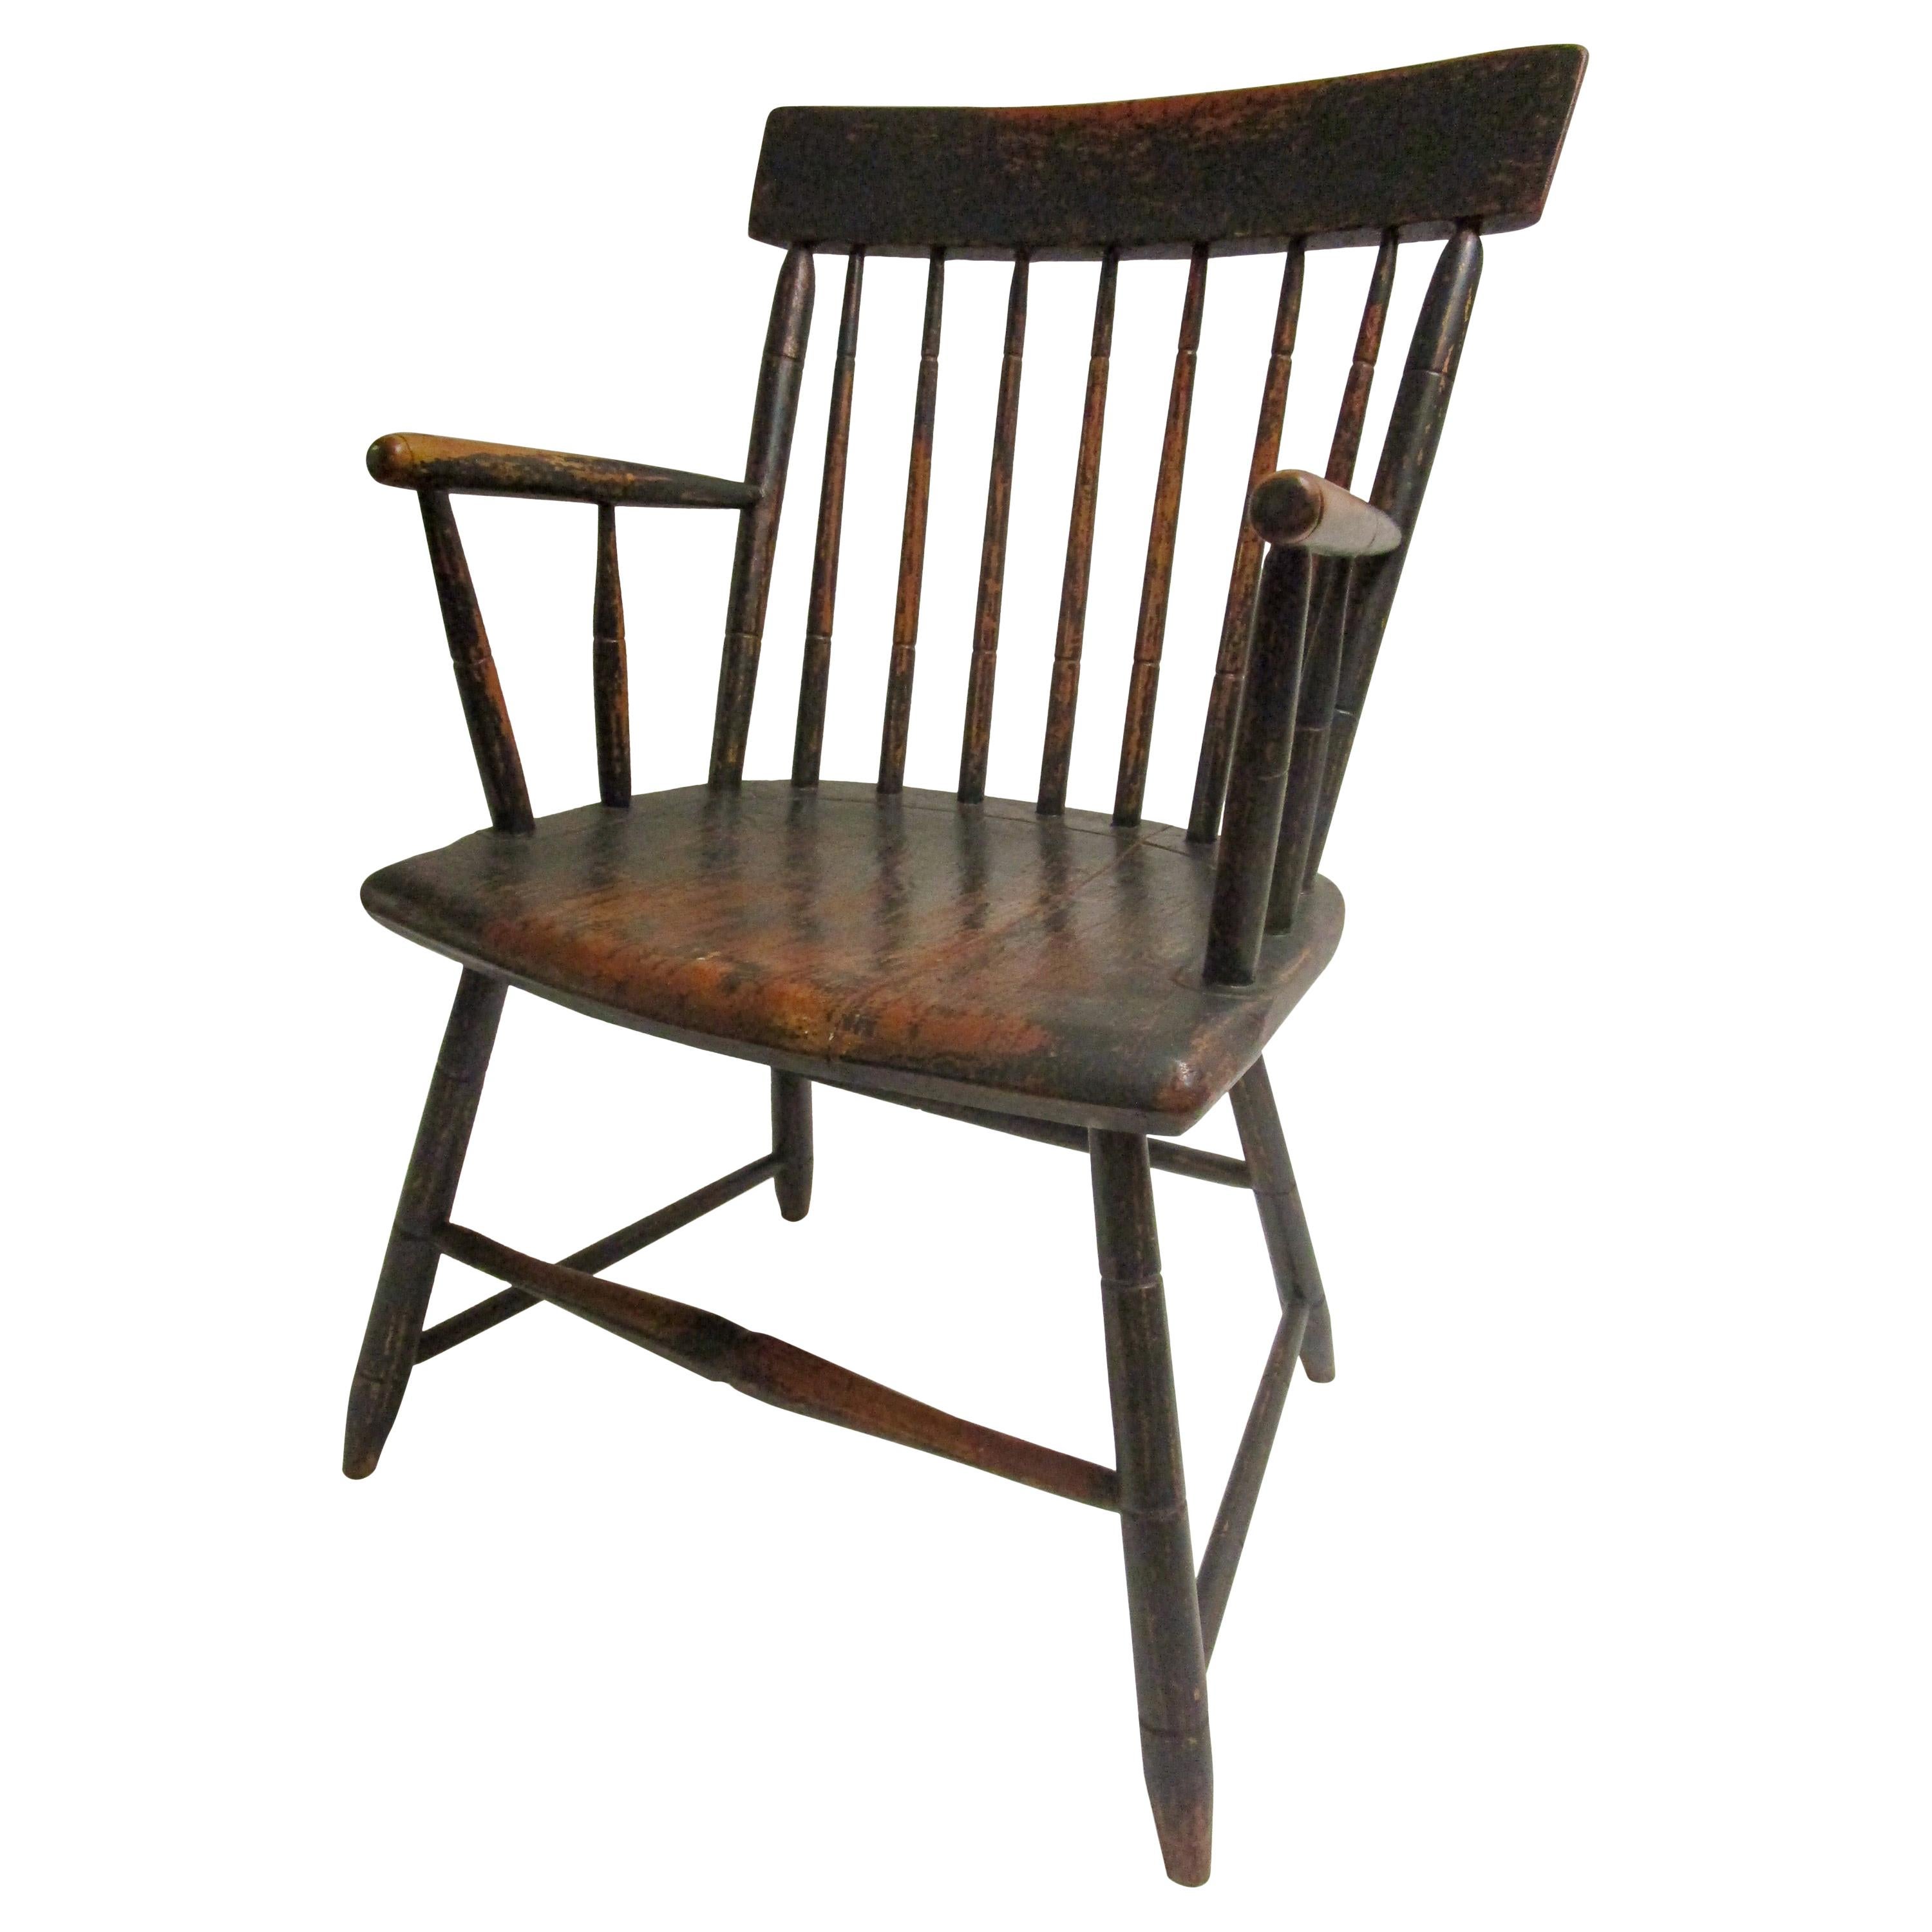 19th Century Windsor Armchair in Petite Size with Original Milk Paint